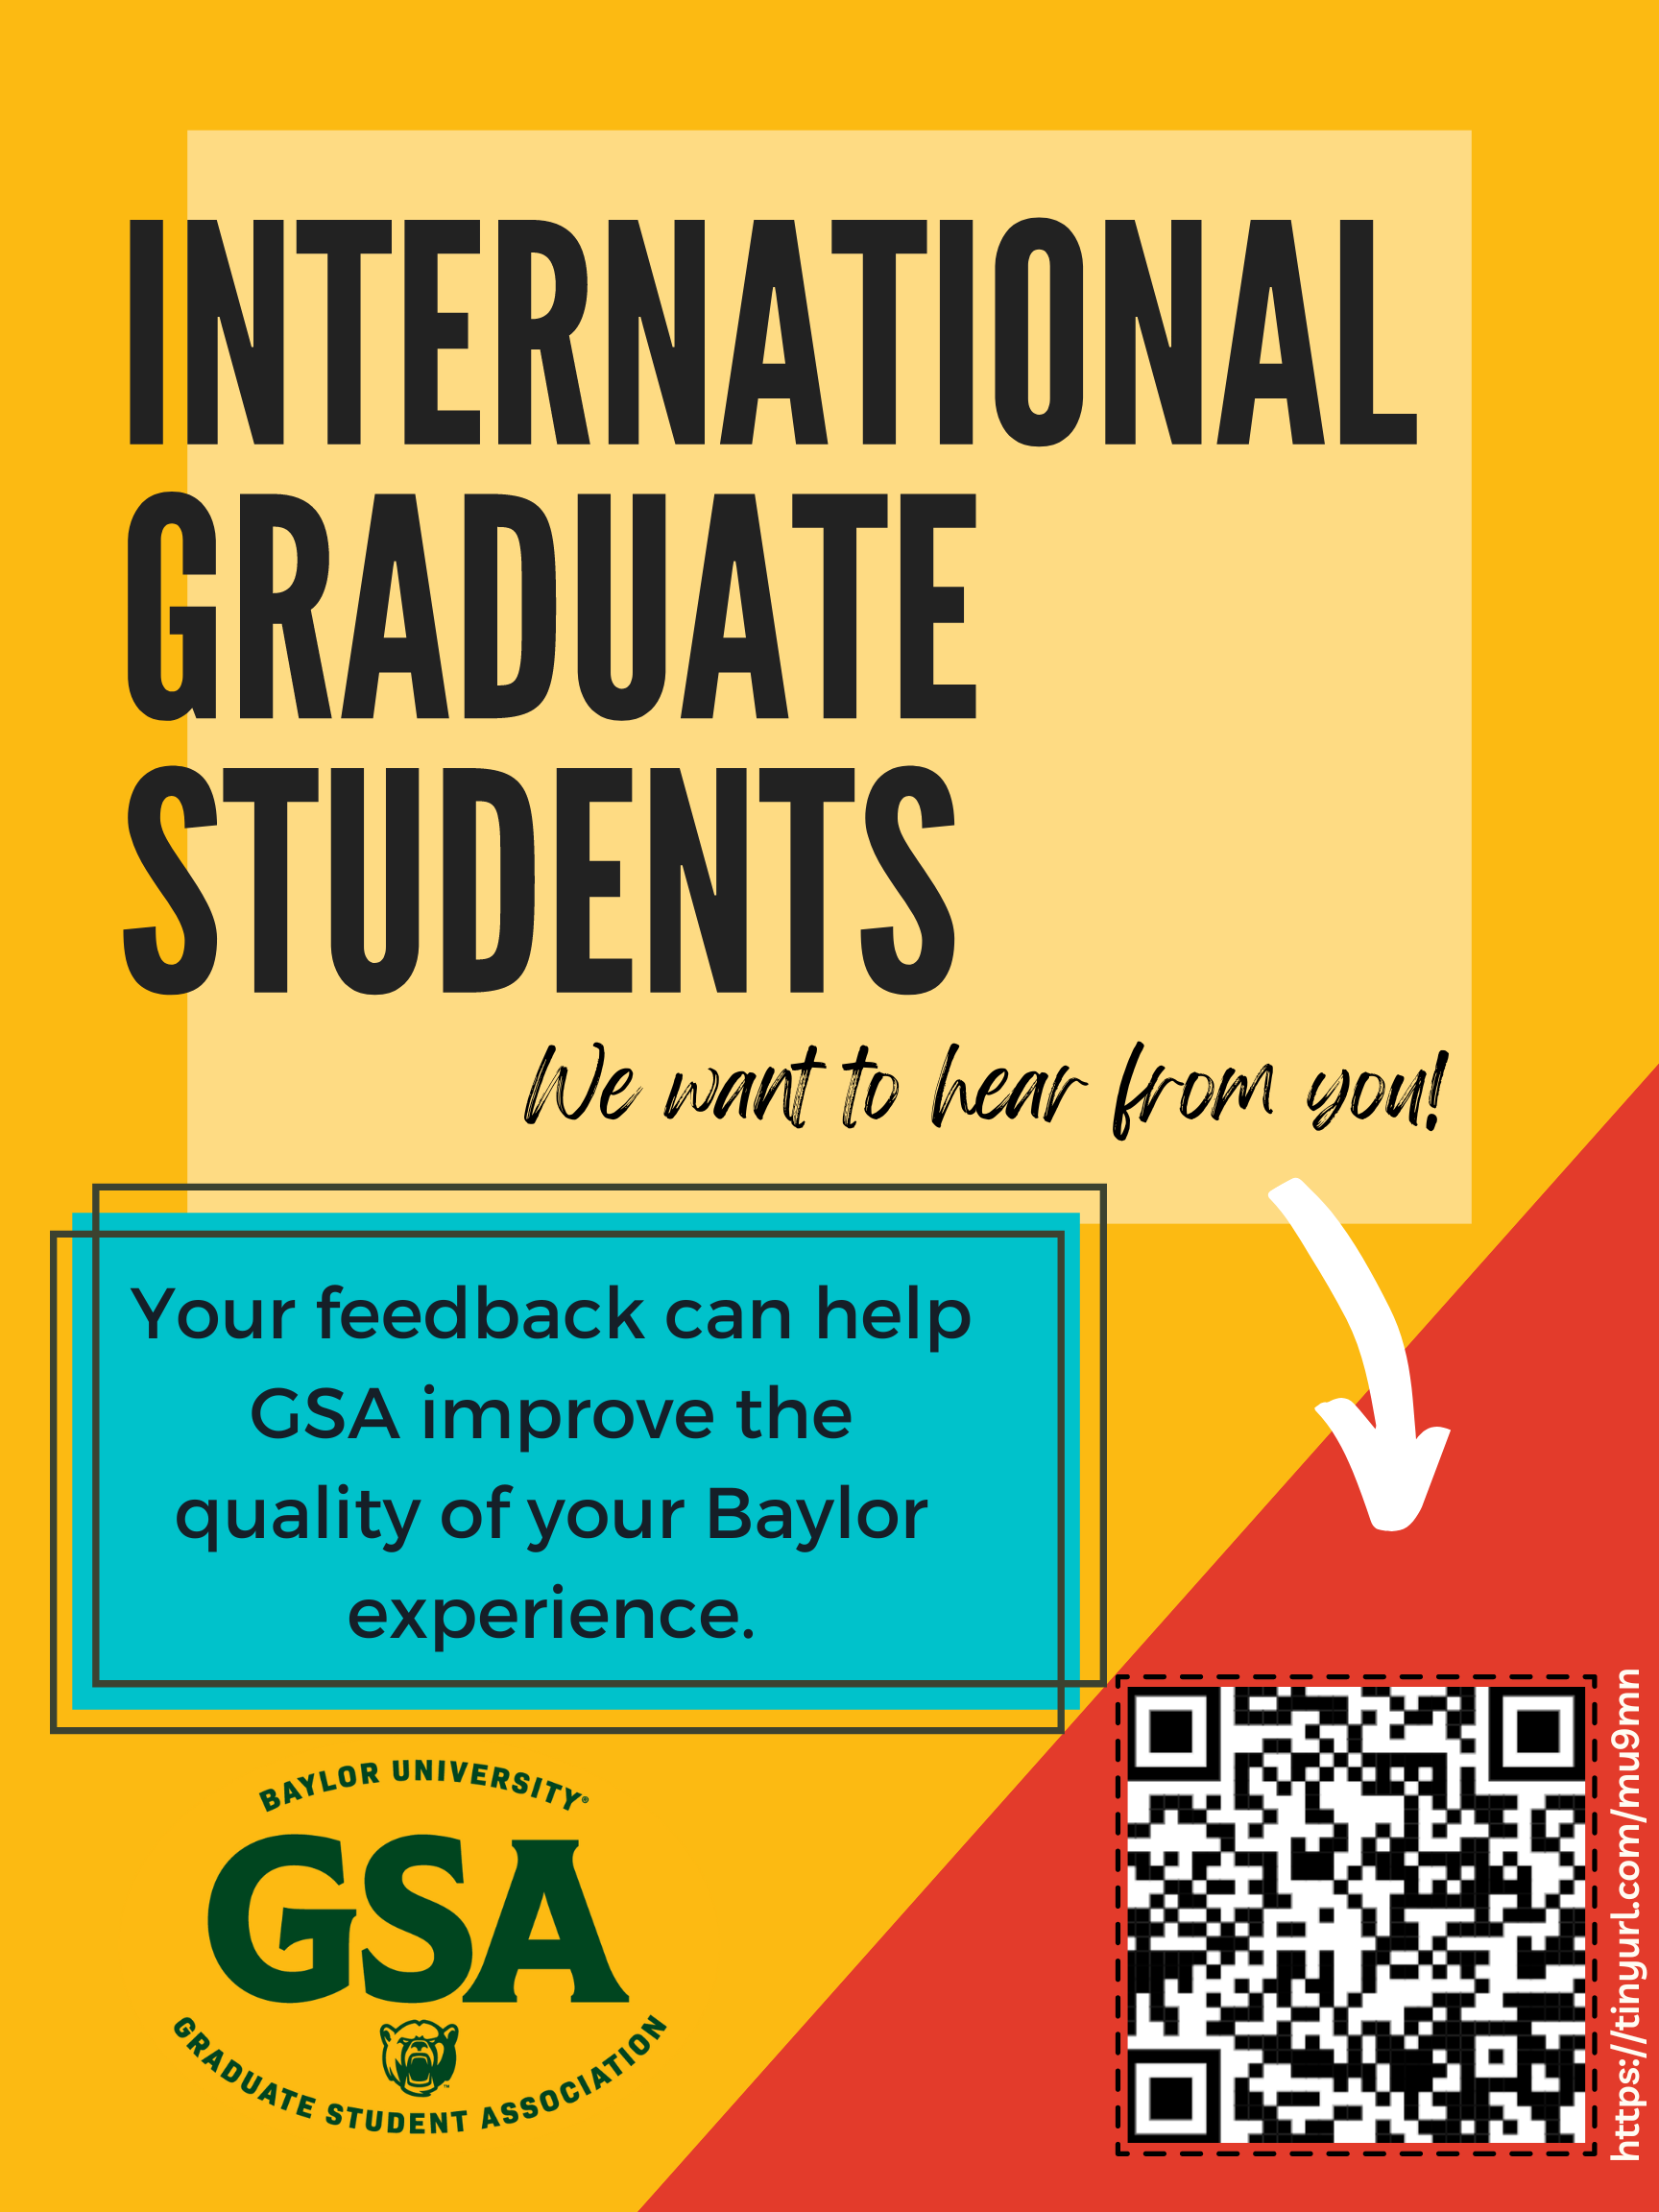 Graduate Student Association. International Graduate Students, we want to hear from you! Your feedback can help GSA improve the quality of your Baylor experience. Scan the QR code to take the survey or visit https://tinyurl.com/mu9mn